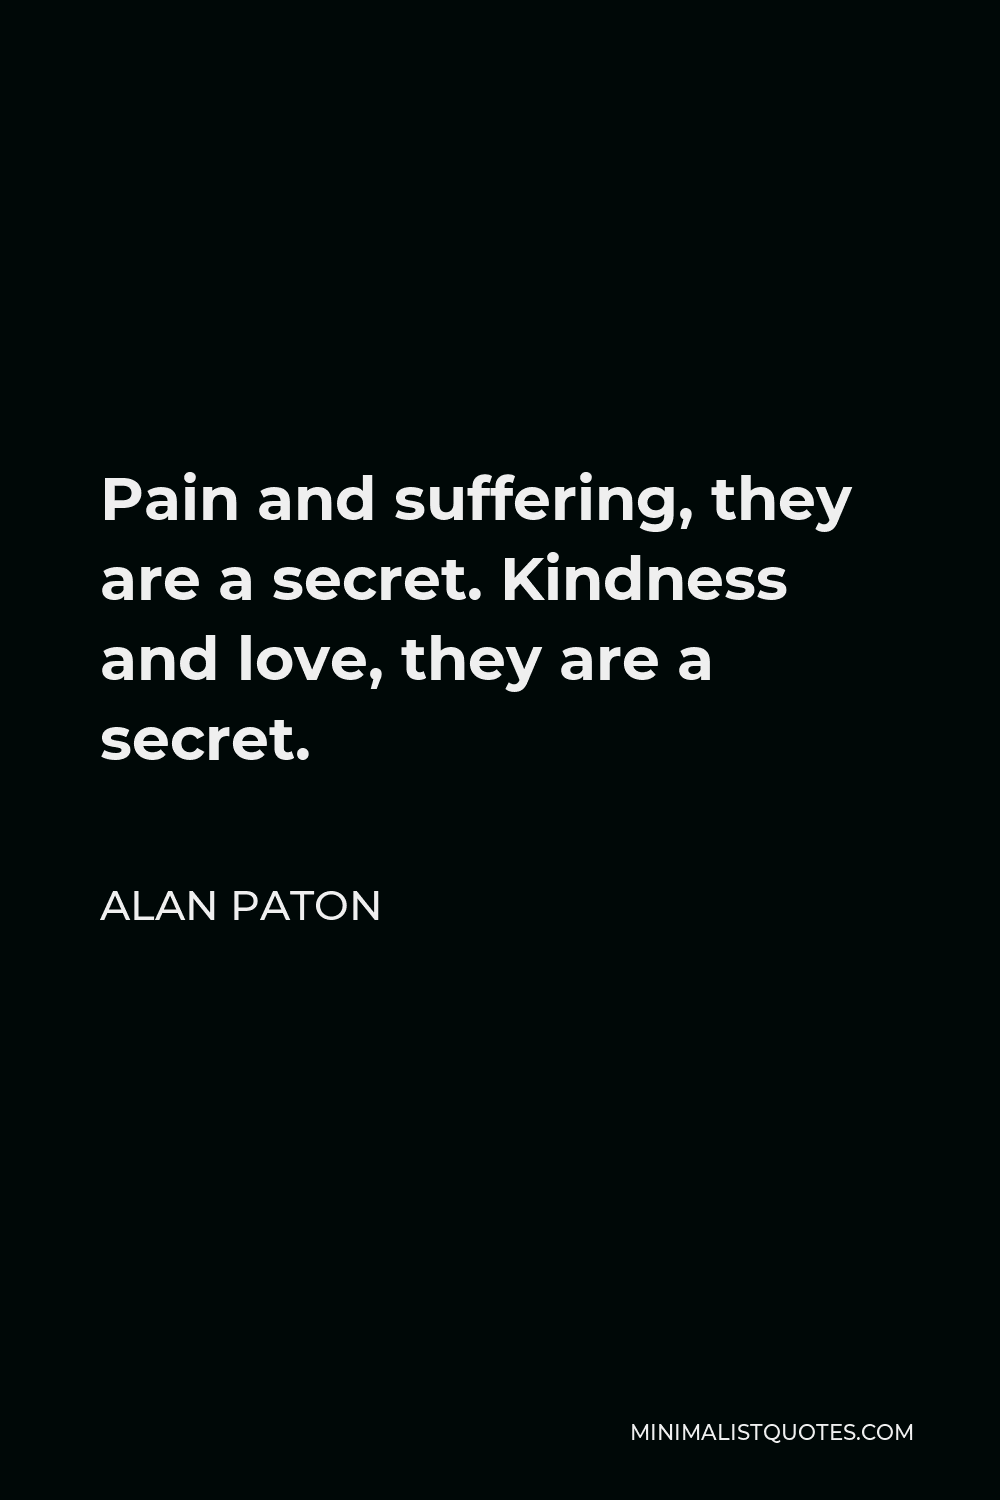 Alan Paton Quote - Pain and suffering, they are a secret. Kindness and love, they are a secret.